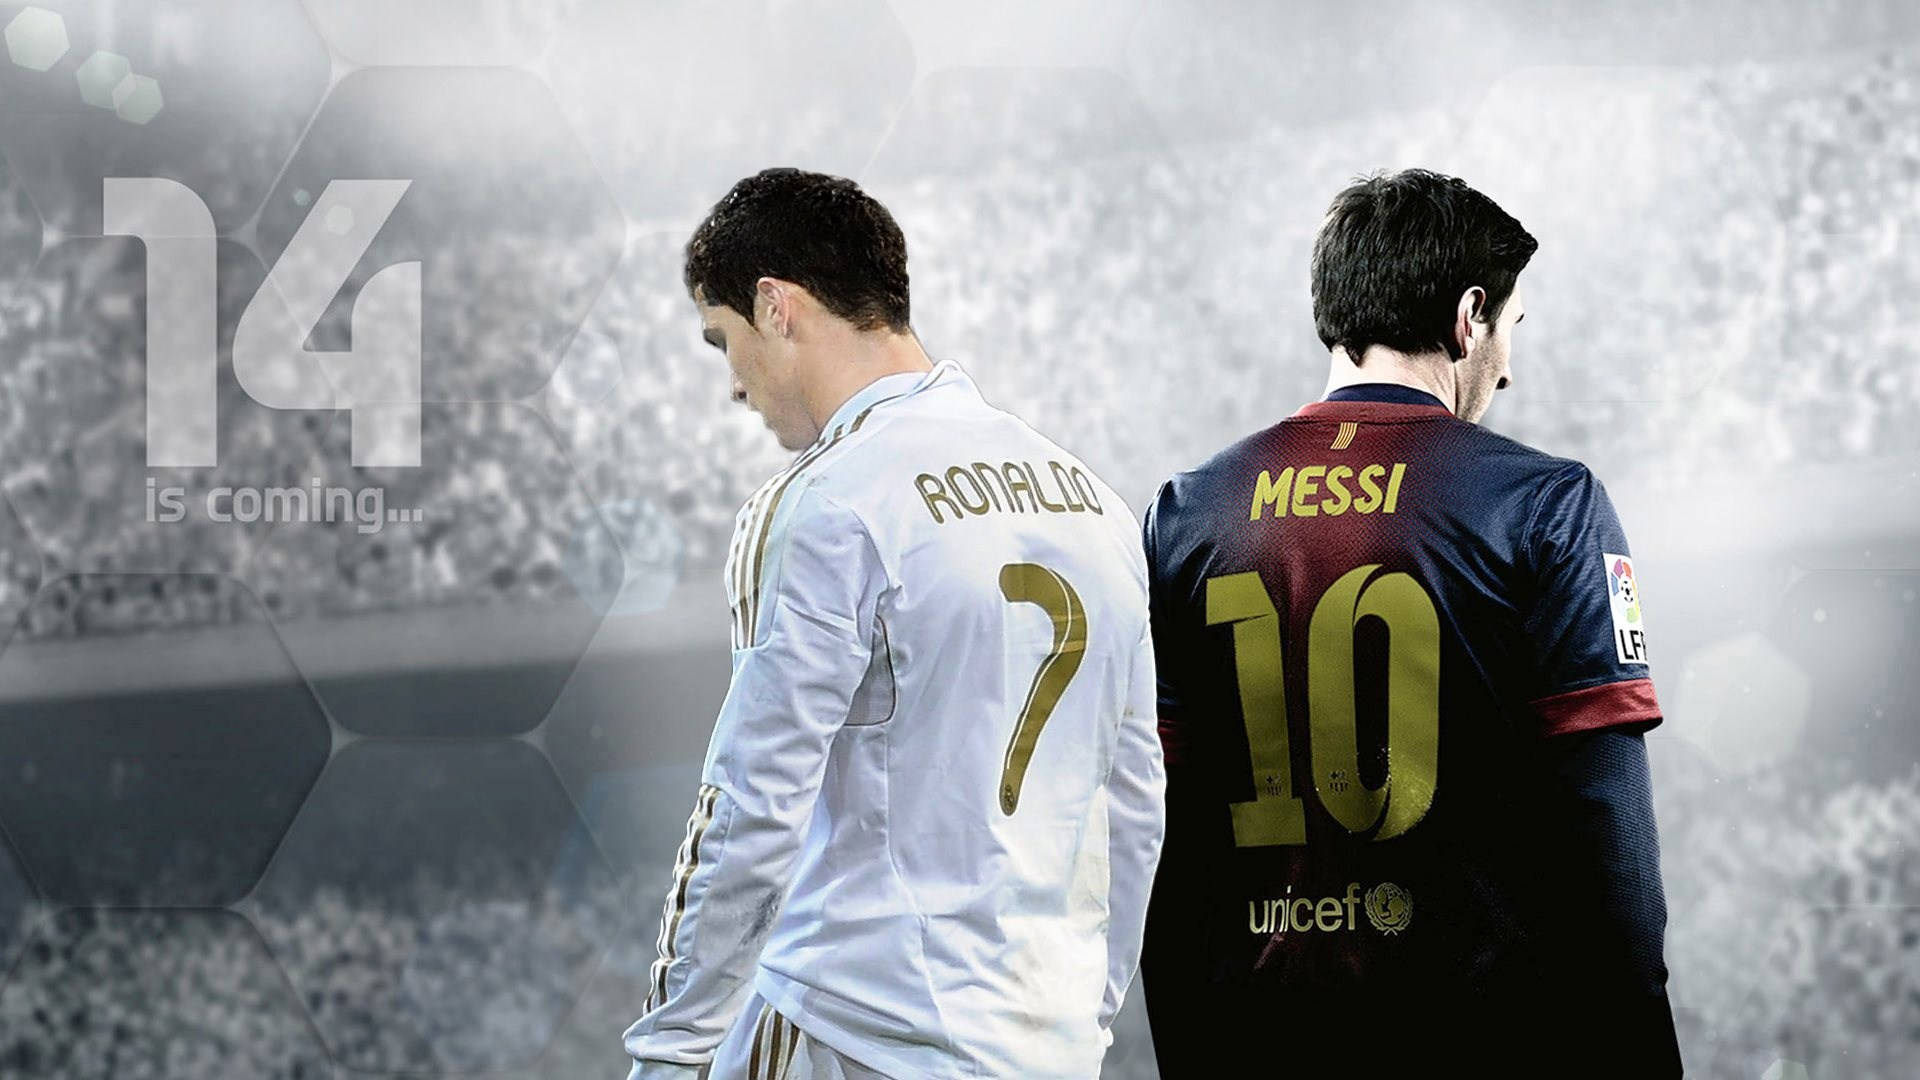 Messi and Ronaldo Wallpaper Discover more Android, Football